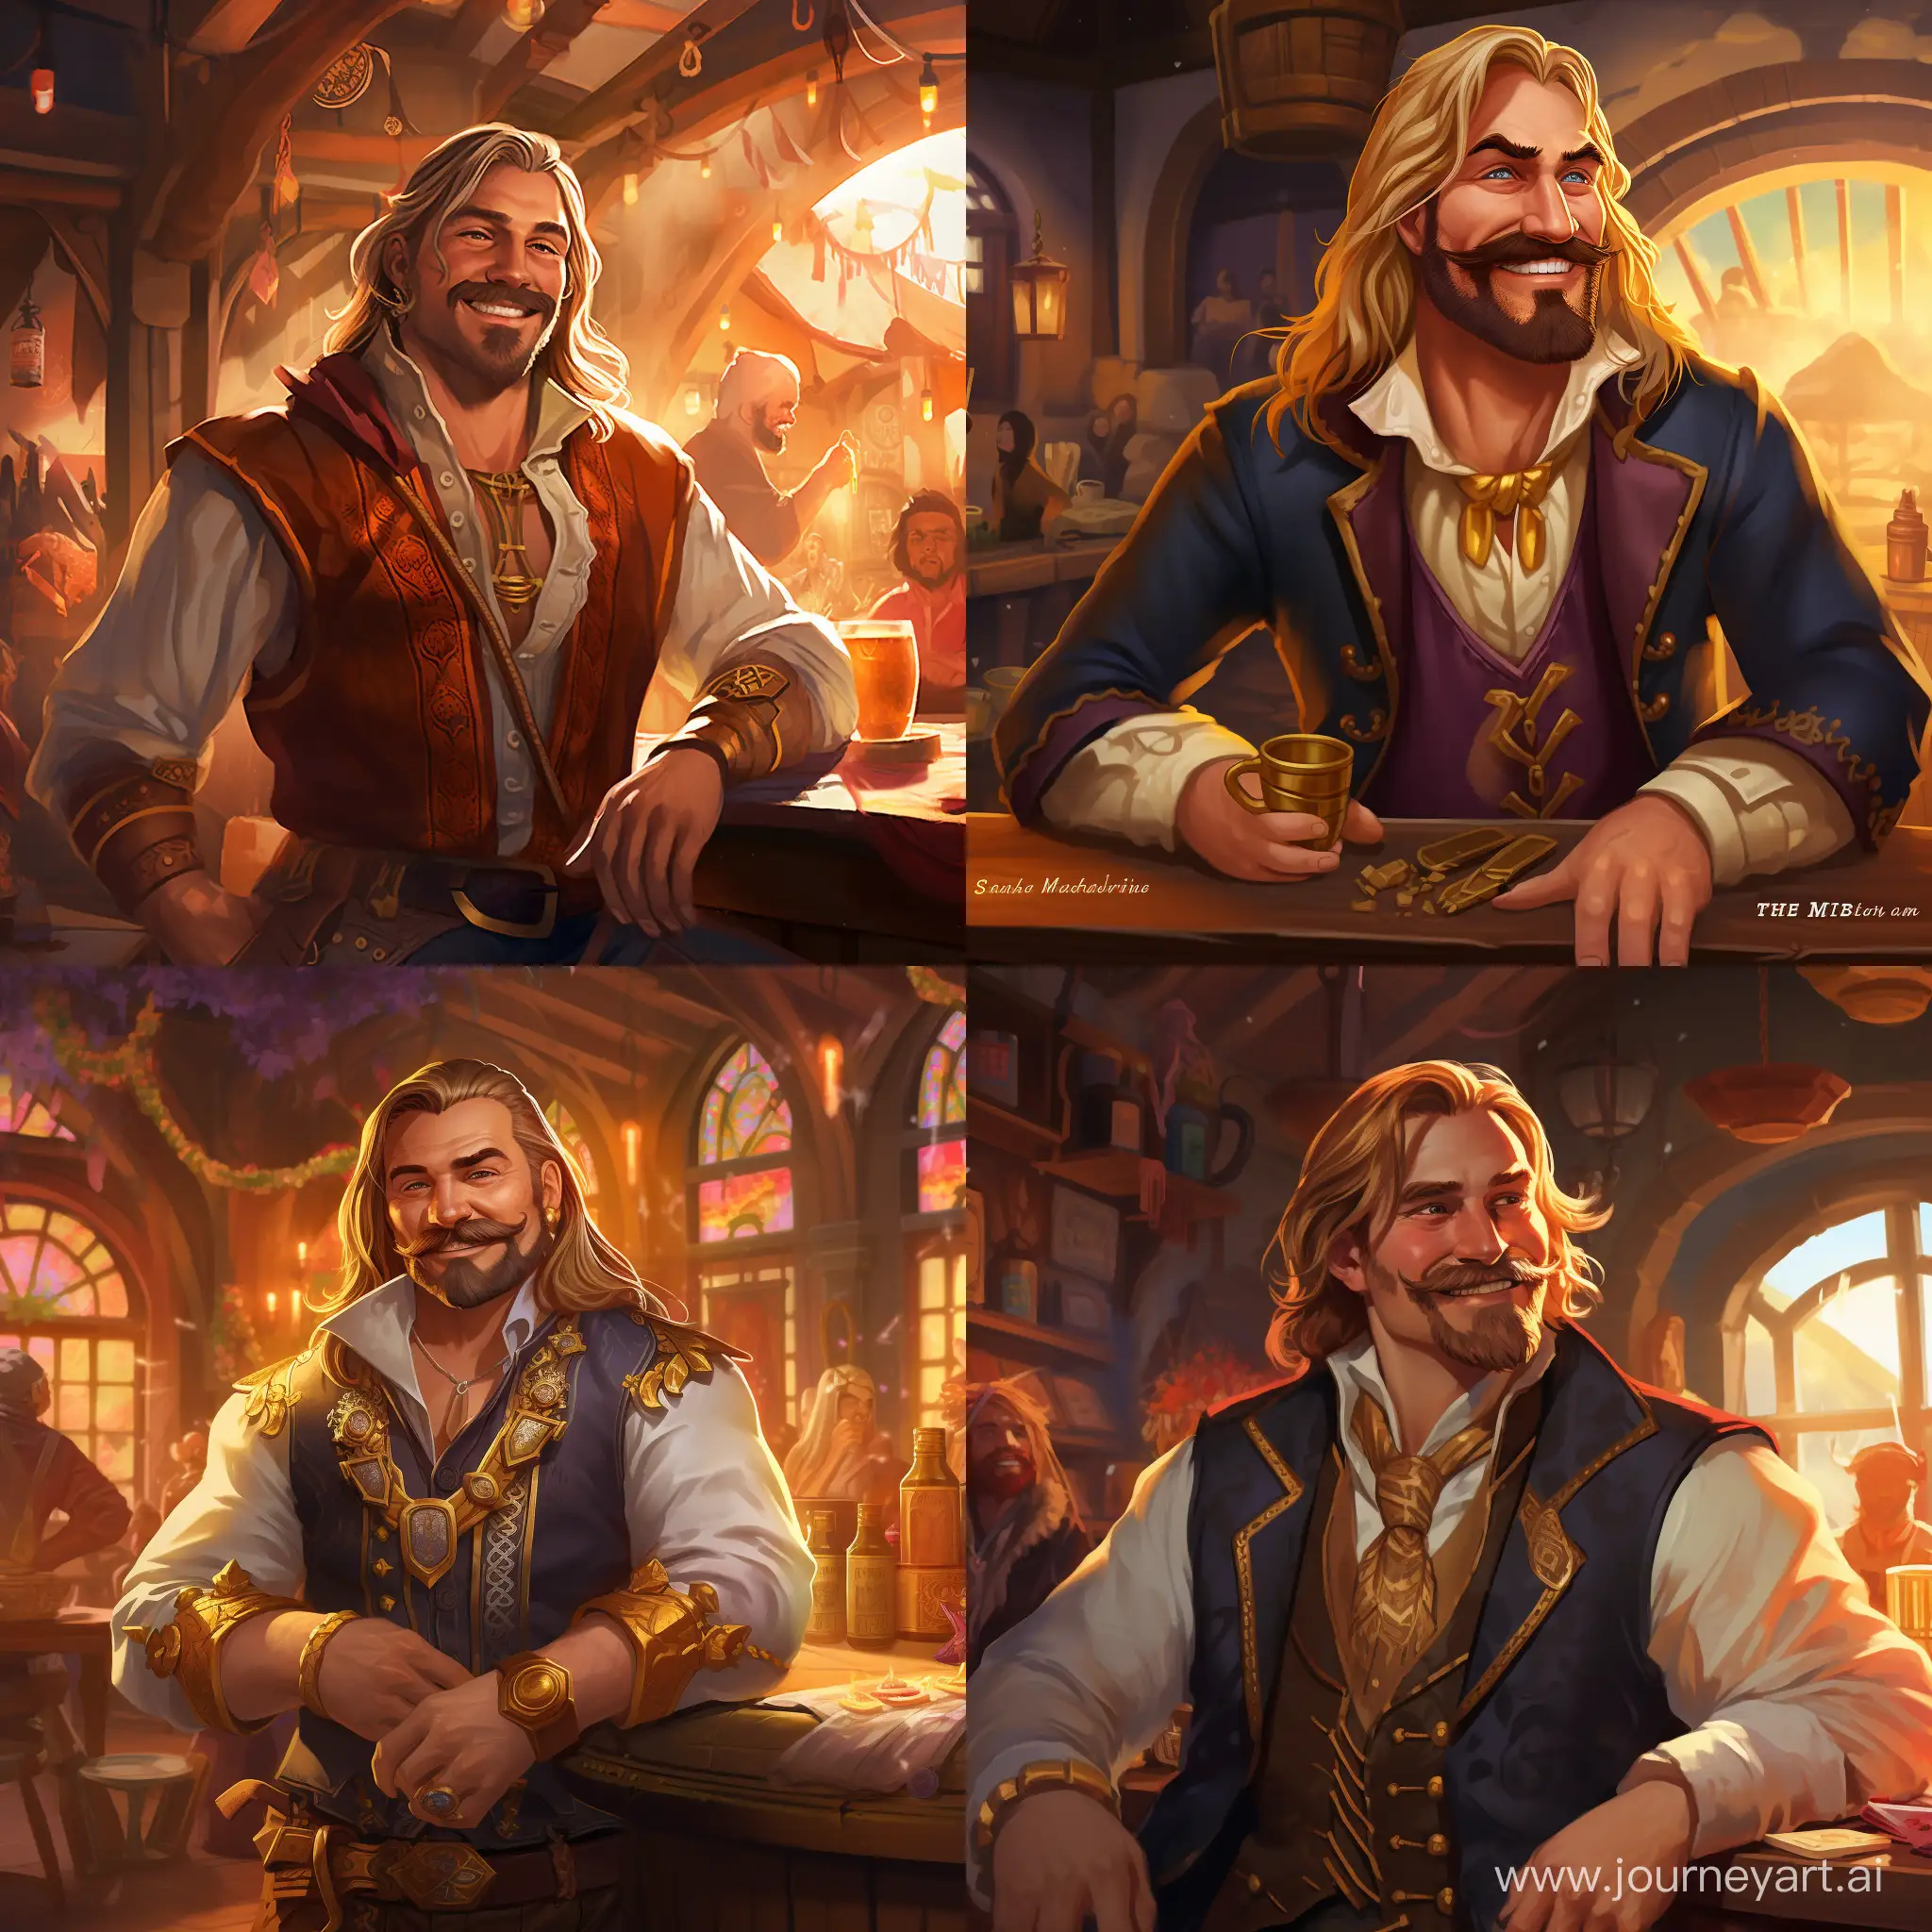 Smiling-Young-Viking-Trader-in-Expensive-Attire-with-a-Vibrant-Tavern-Scene